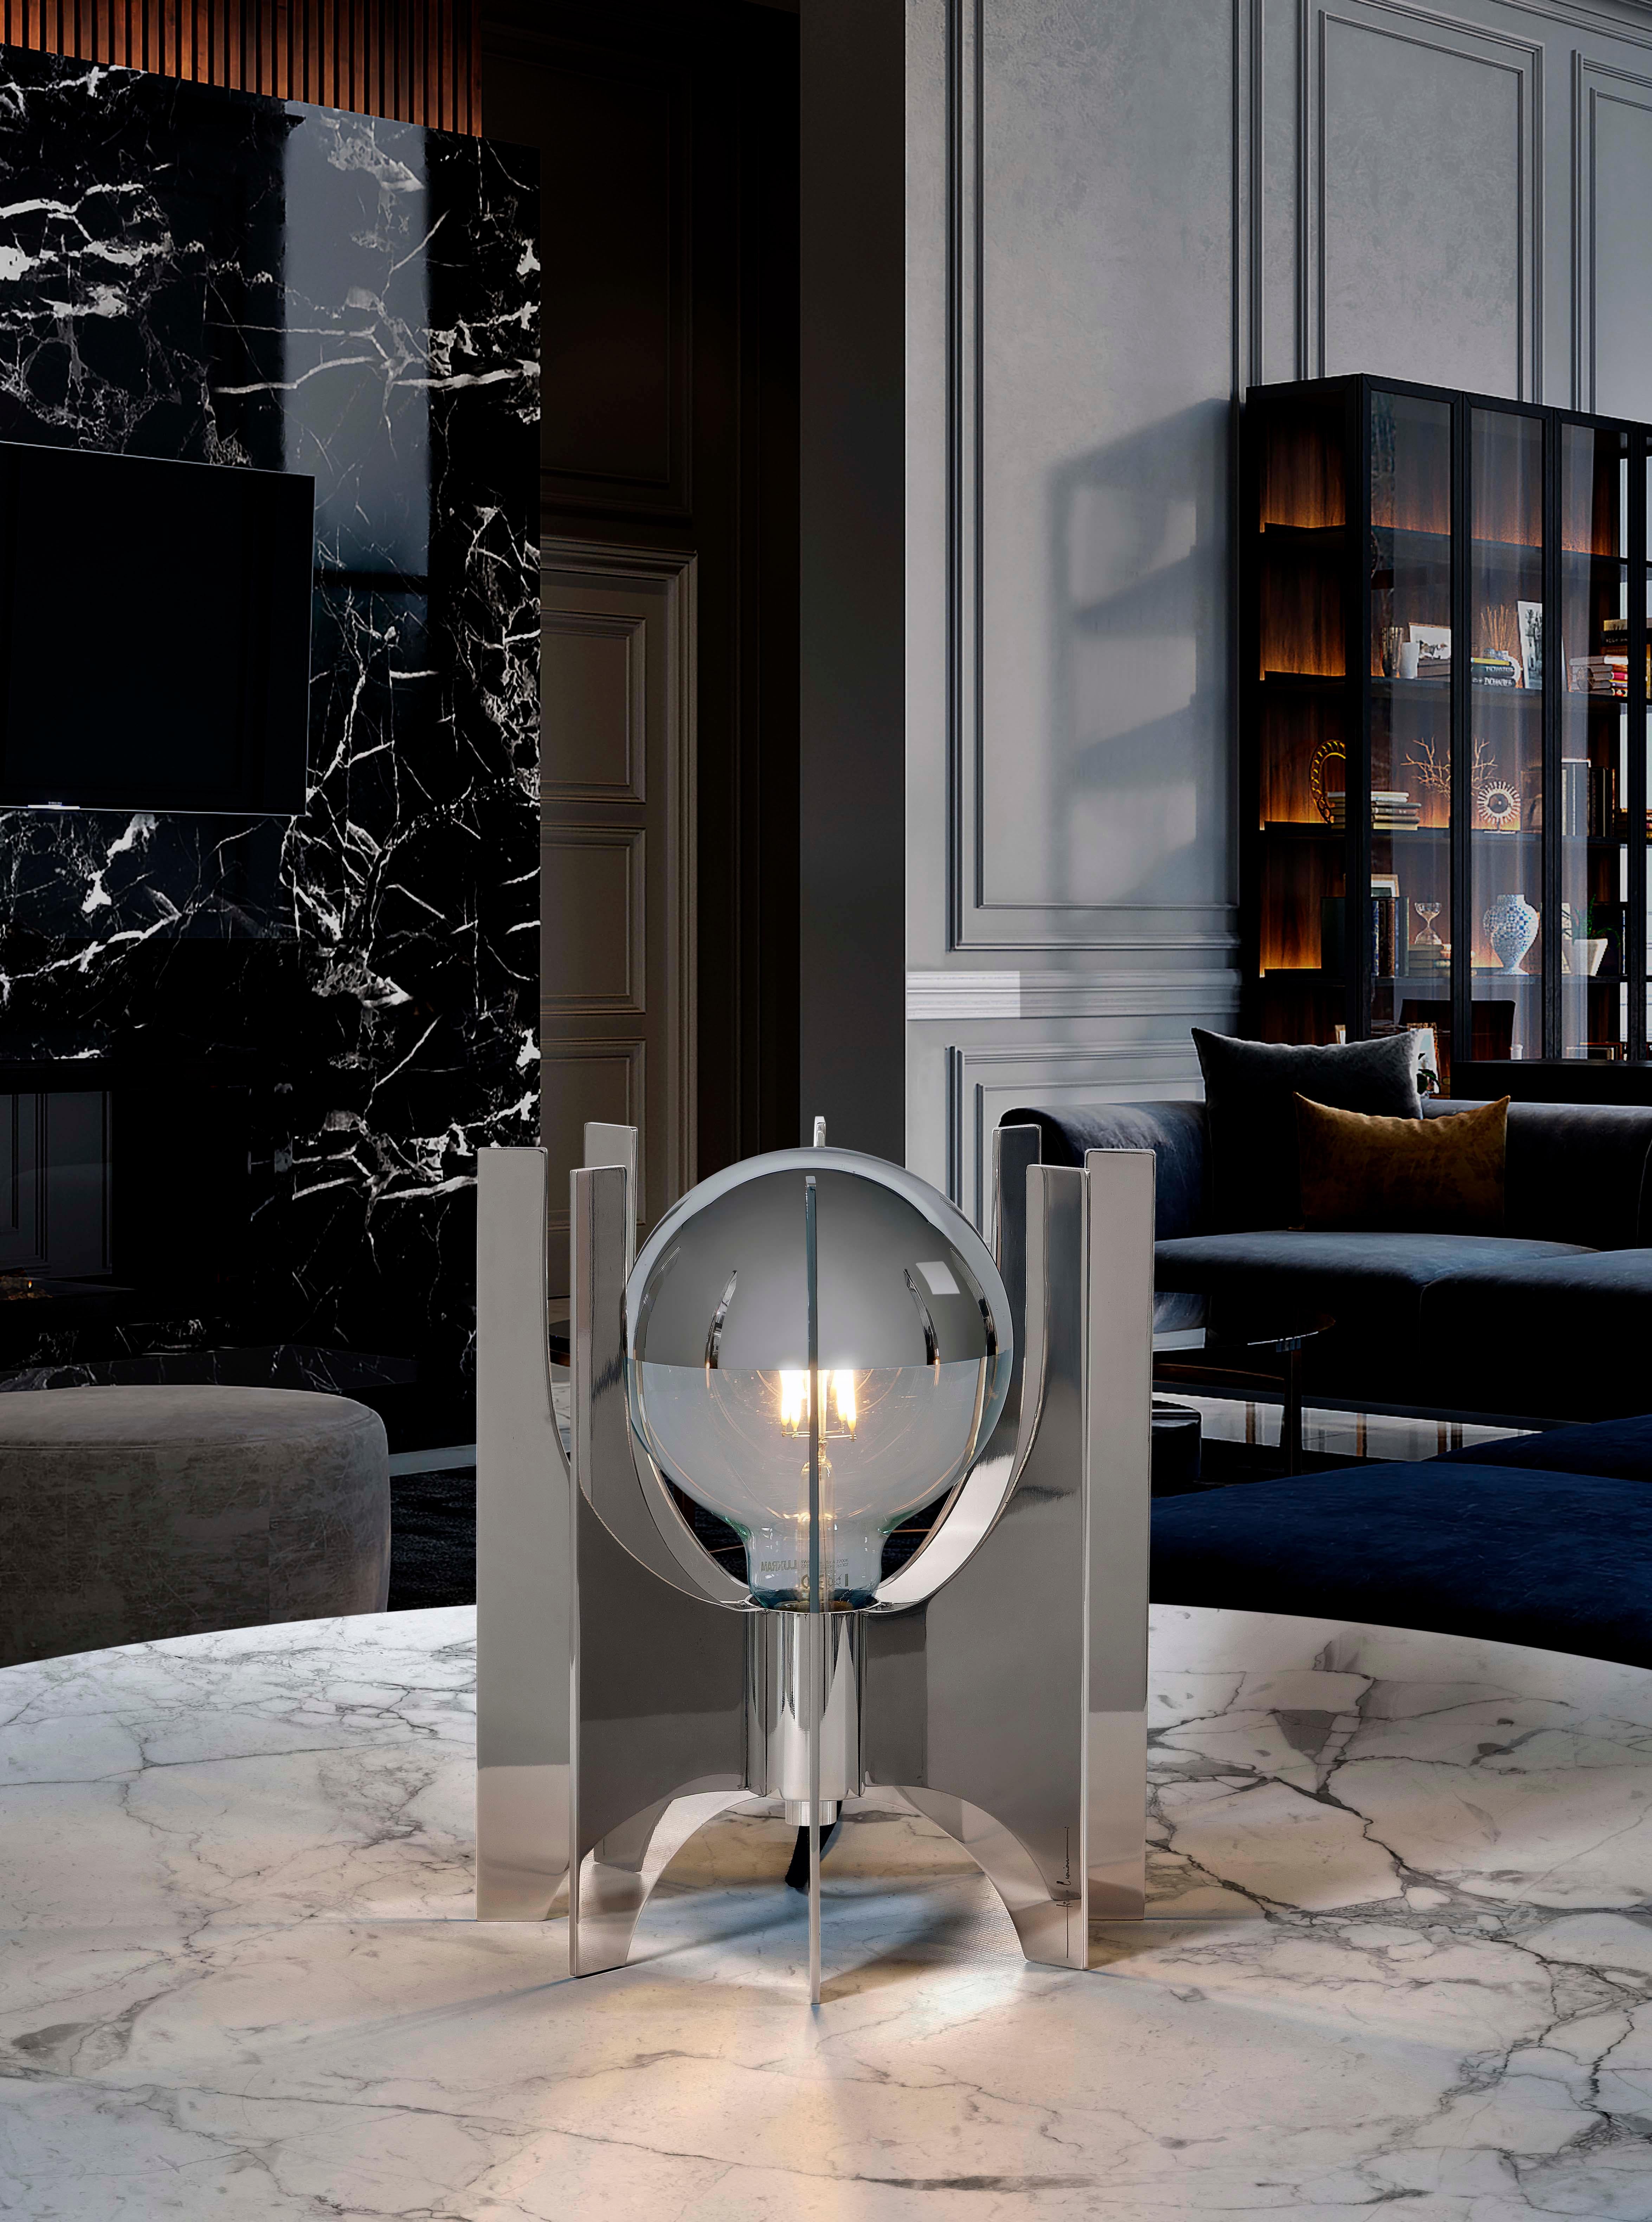 Carrousel is a table lamp developed through the repetition of a single part, the stainless steel tab that surrounds the loose base of the surface and which is inspired by the typical adornments of Art Déco buildings. 

With hand polishing and each